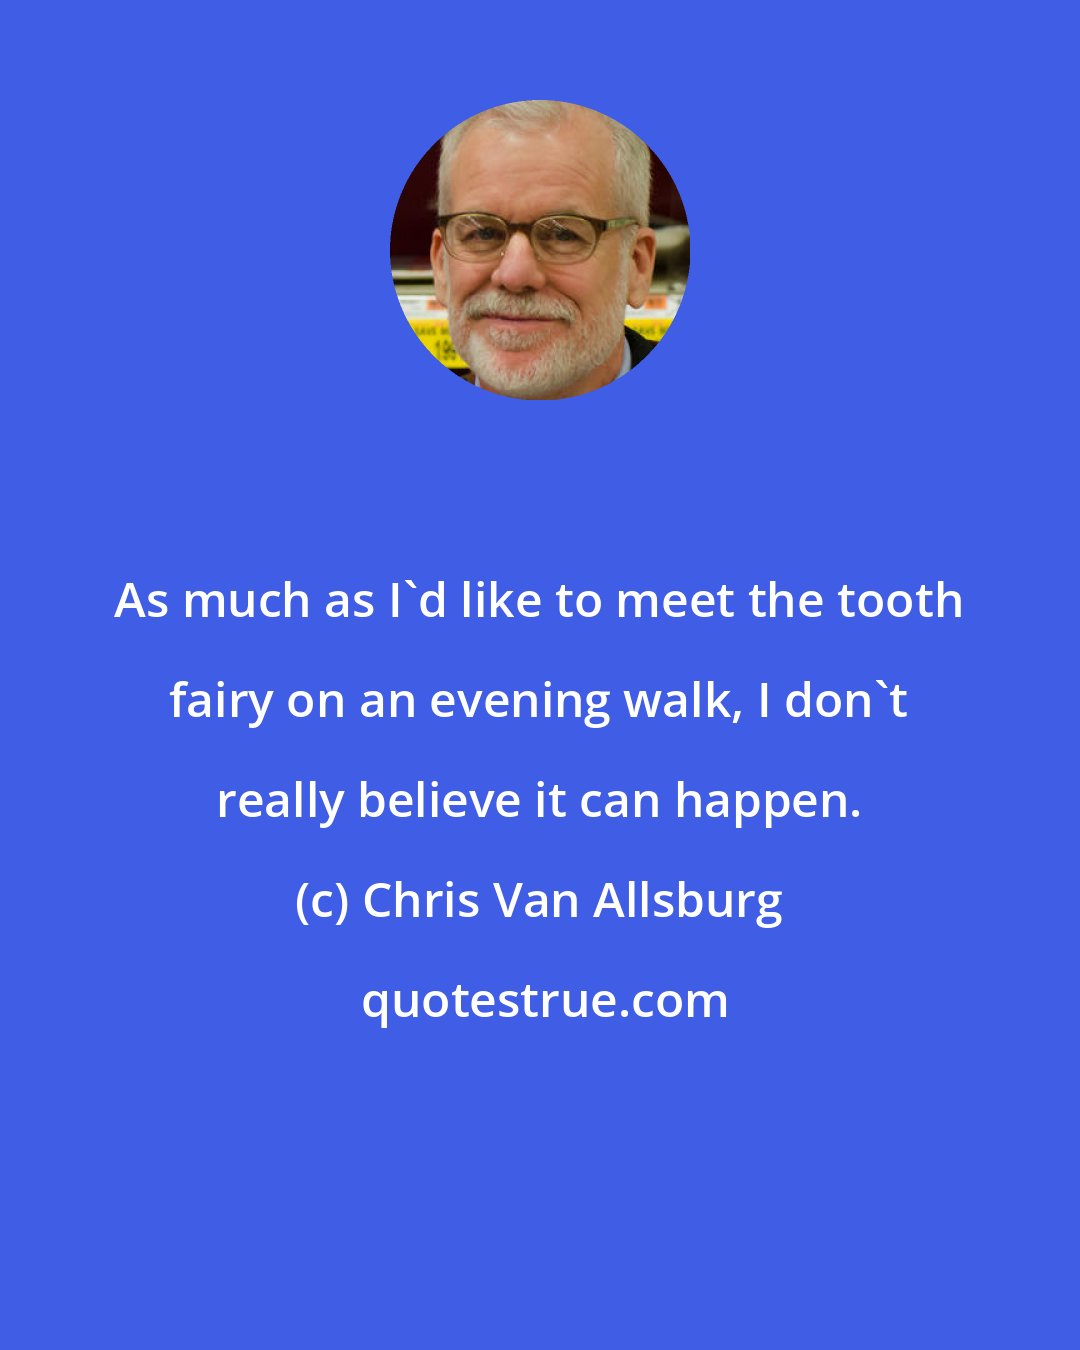 Chris Van Allsburg: As much as I'd like to meet the tooth fairy on an evening walk, I don't really believe it can happen.